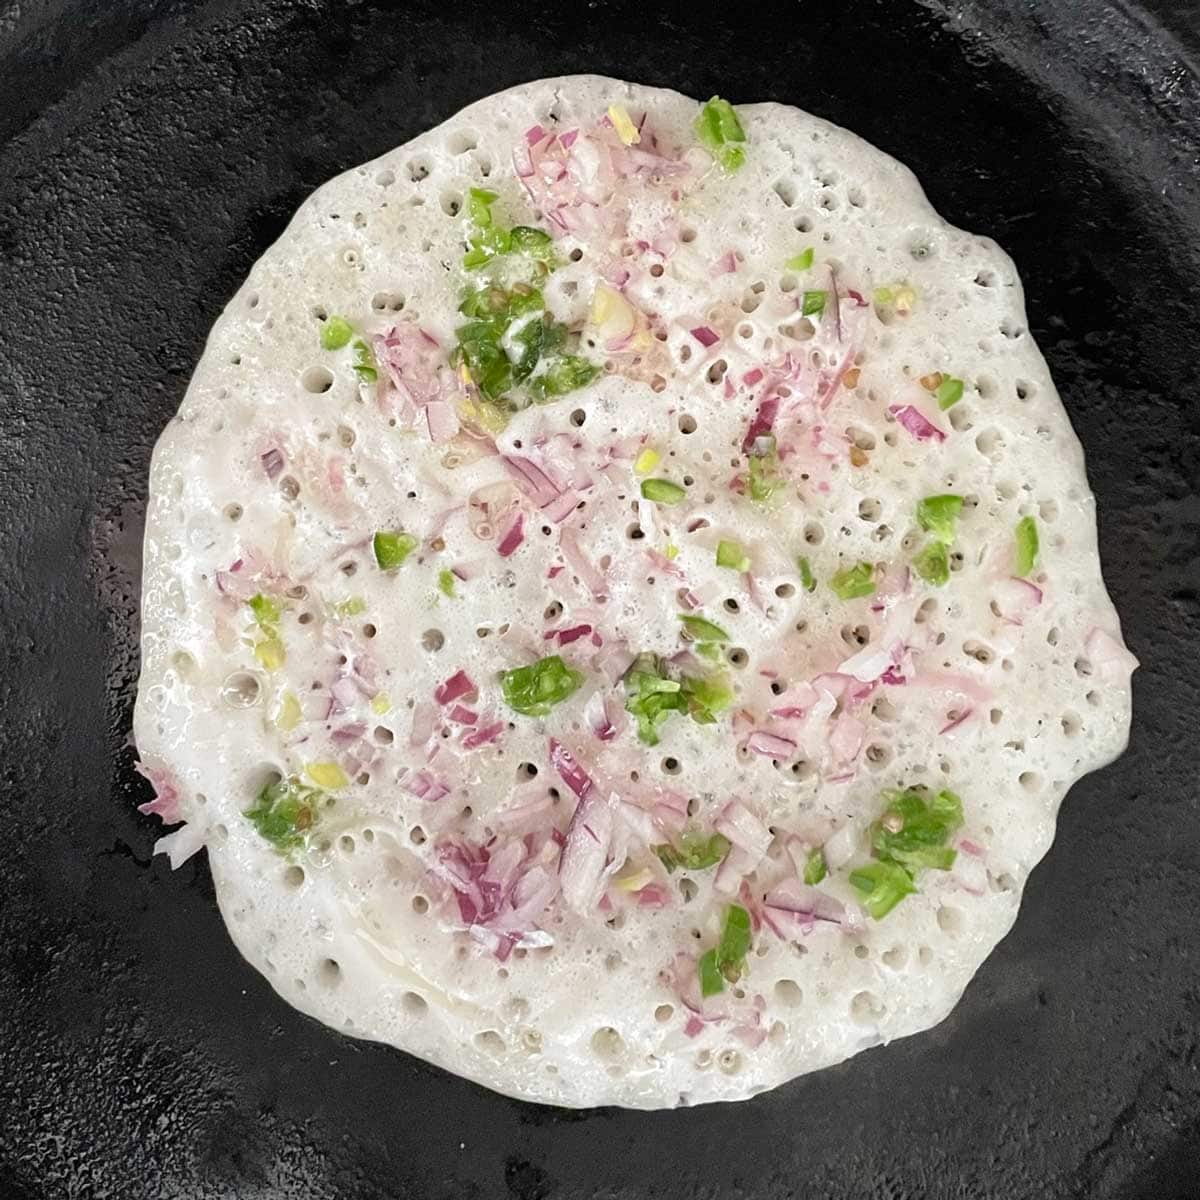 Garnish with onion and green pepper over uthappam batter.